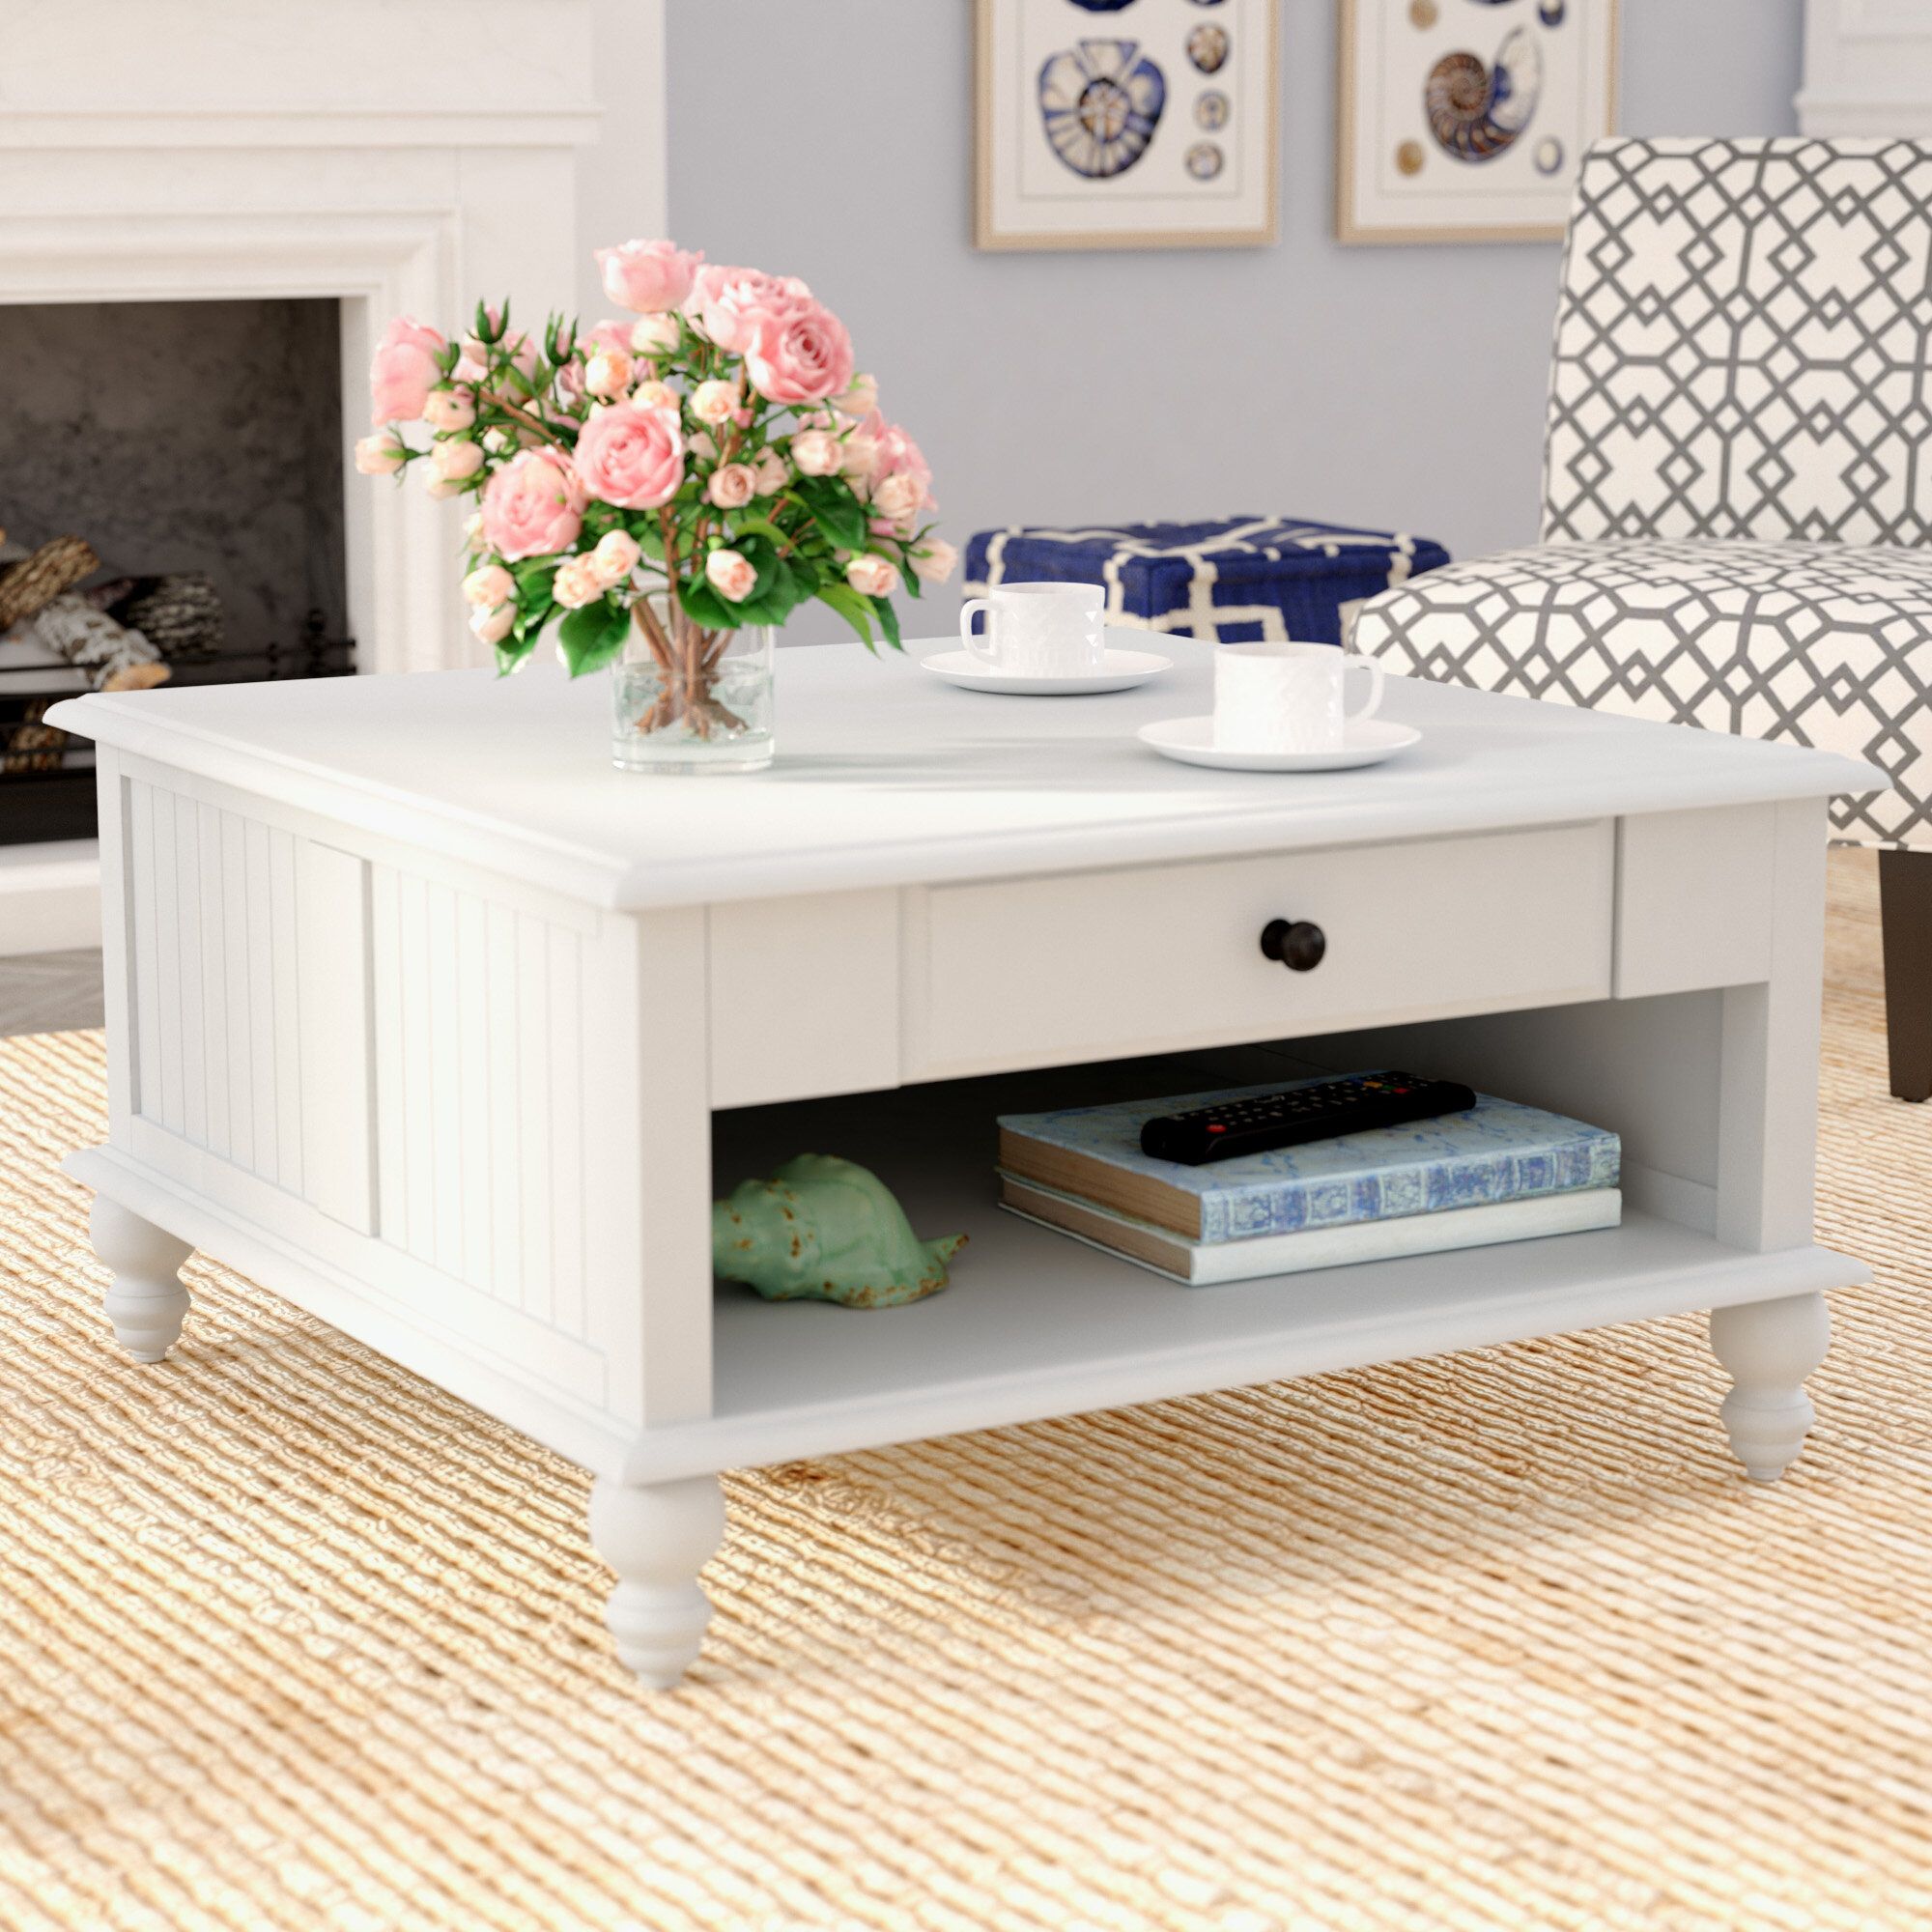 Rosecliff Heights Witherspoon Coffee Table With Storage & Reviews | Wayfair With Regard To White Storage Coffee Tables (View 1 of 15)